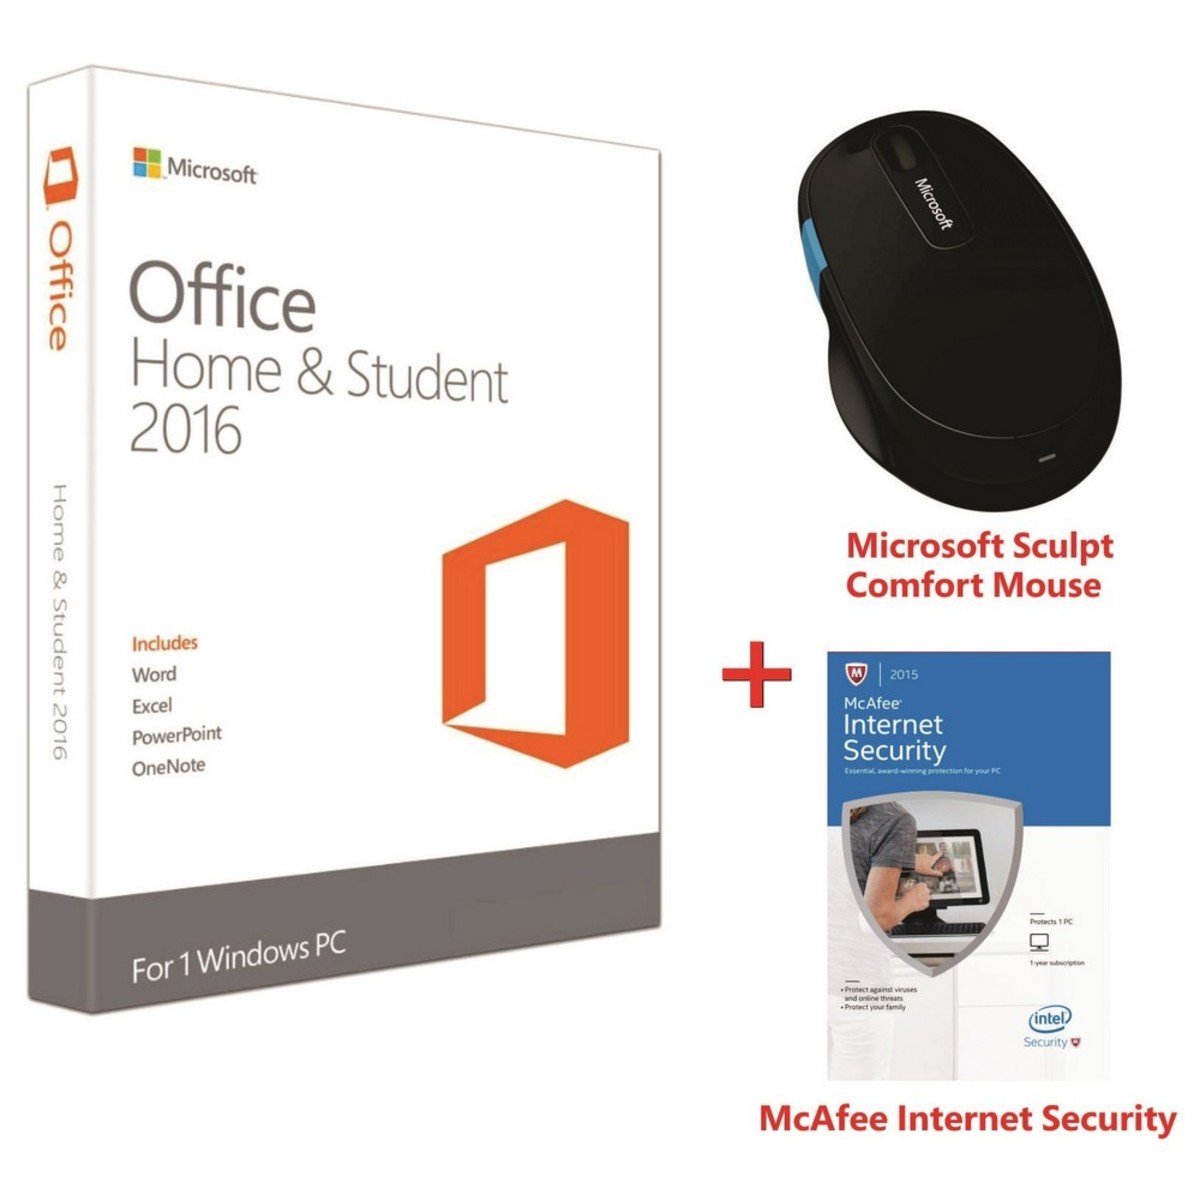 Microsoft Office Home & Student 2016 + Sculpt Comfort Mouse + McAfee Internet Security